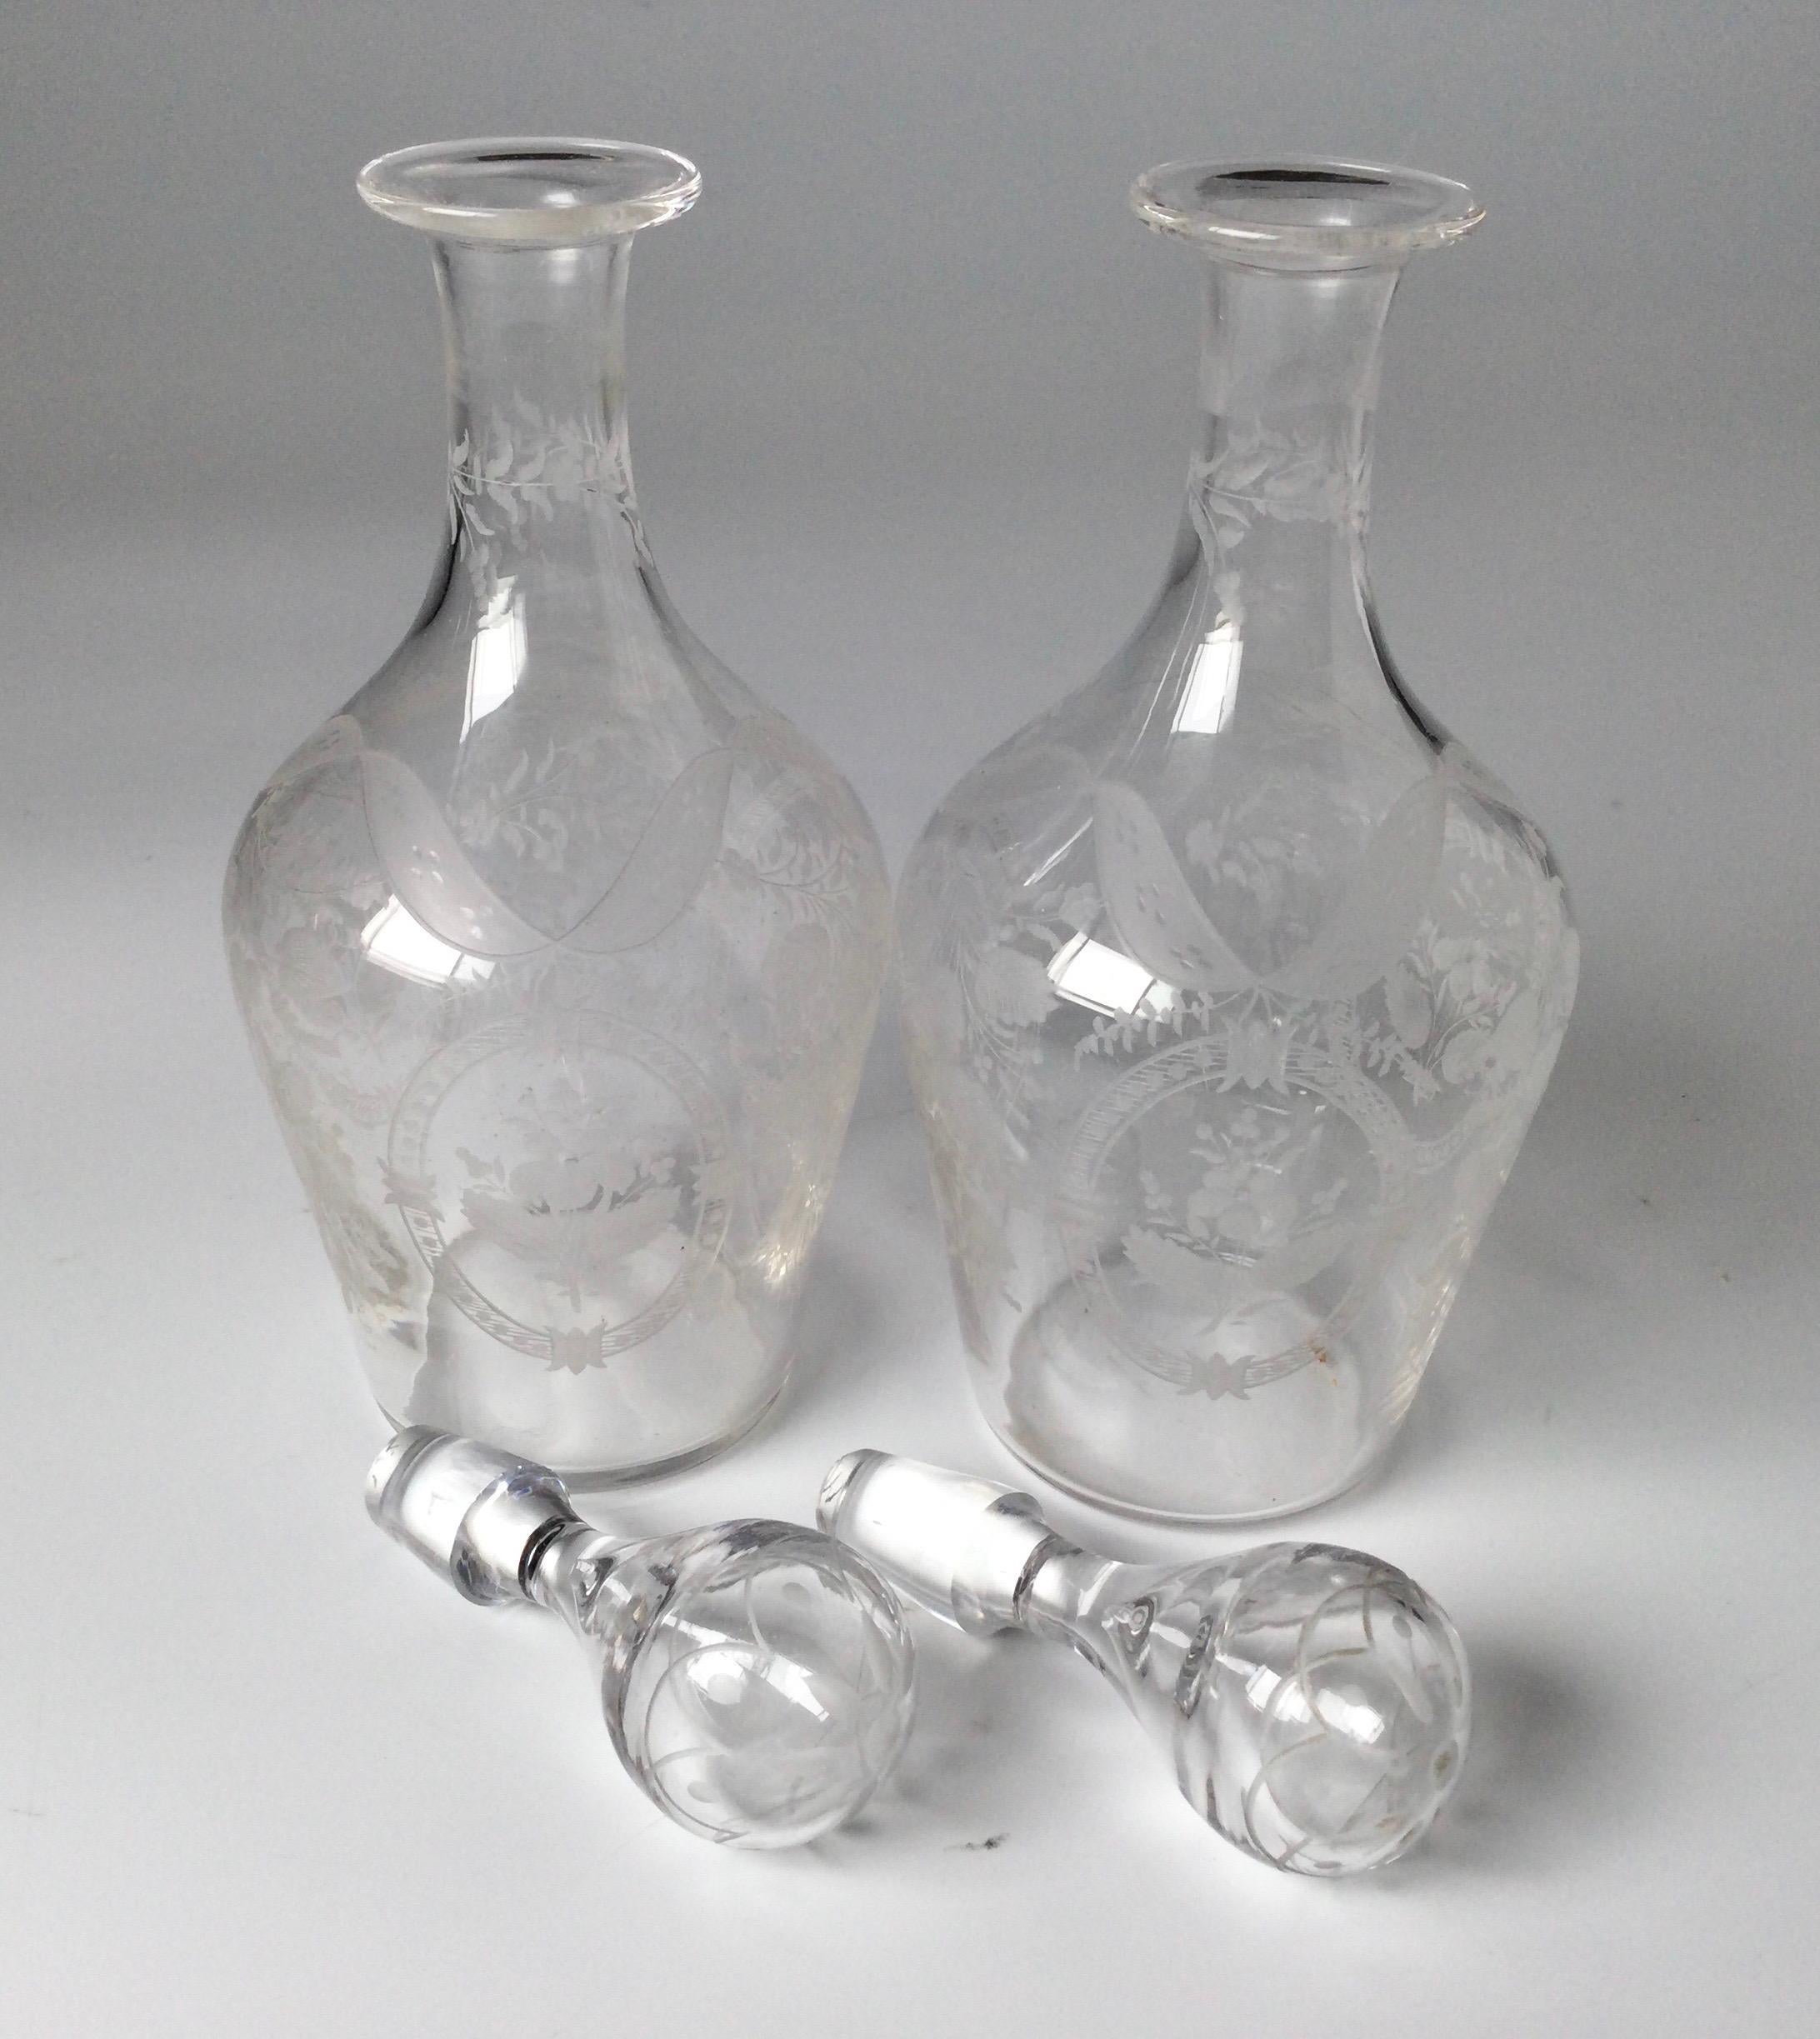 Edwardian Pair of Diminutive Engraved Hand Blown Decanters